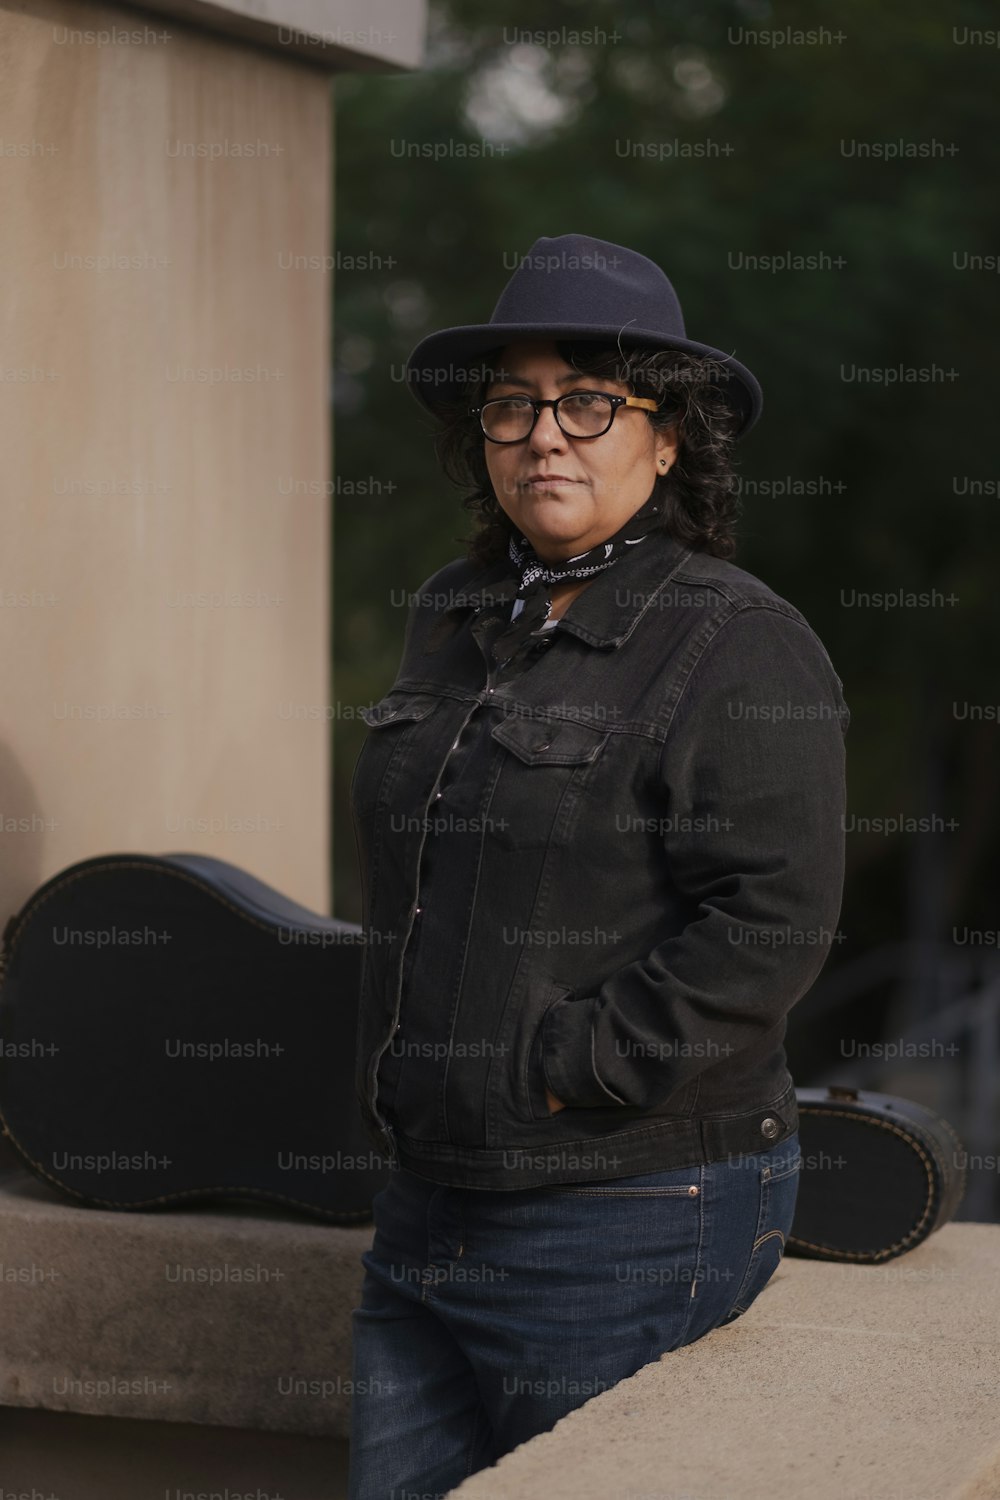 a woman with a hat and glasses standing next to a guitar